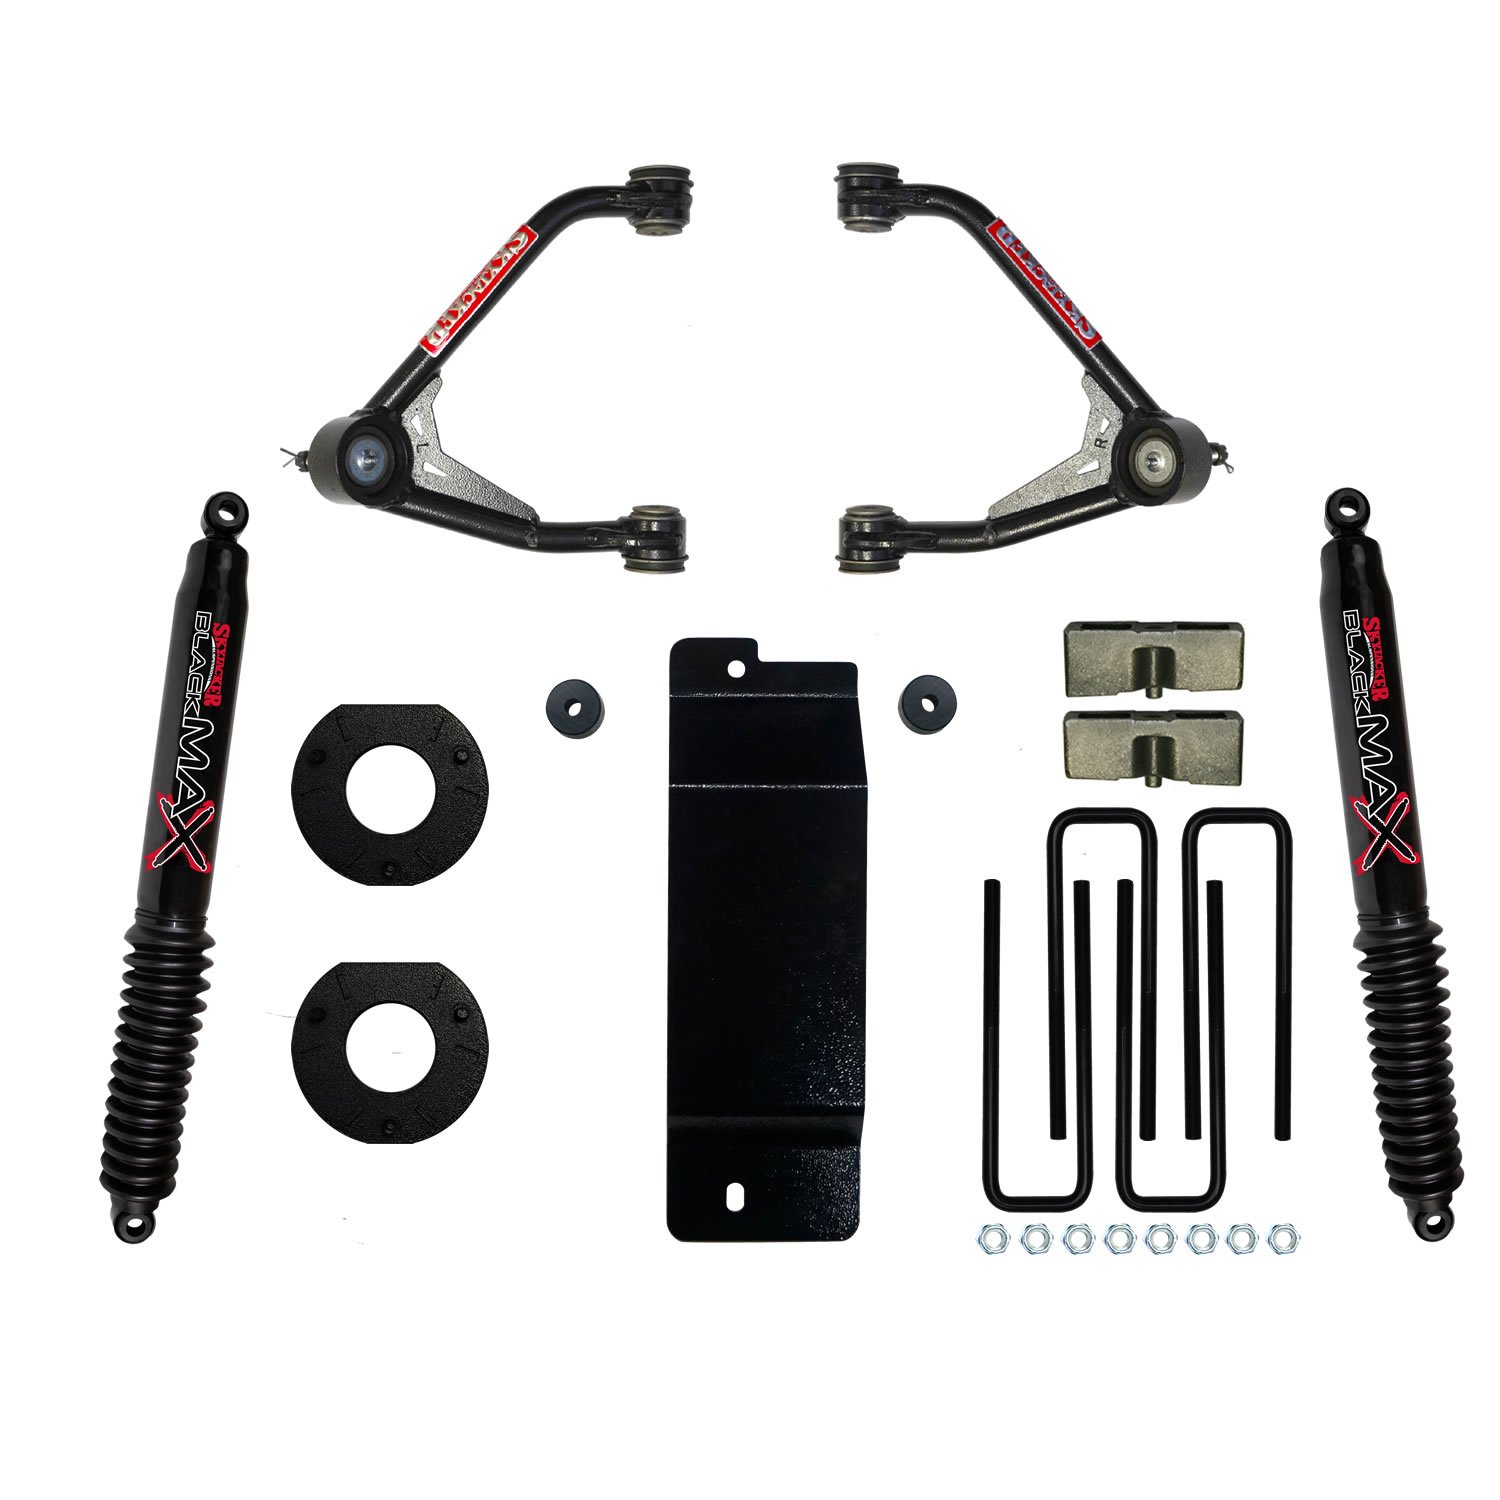 3.500-4.000 In. Upper Control Arm Lift Kit with BlackMax B8500 Rear Shocks